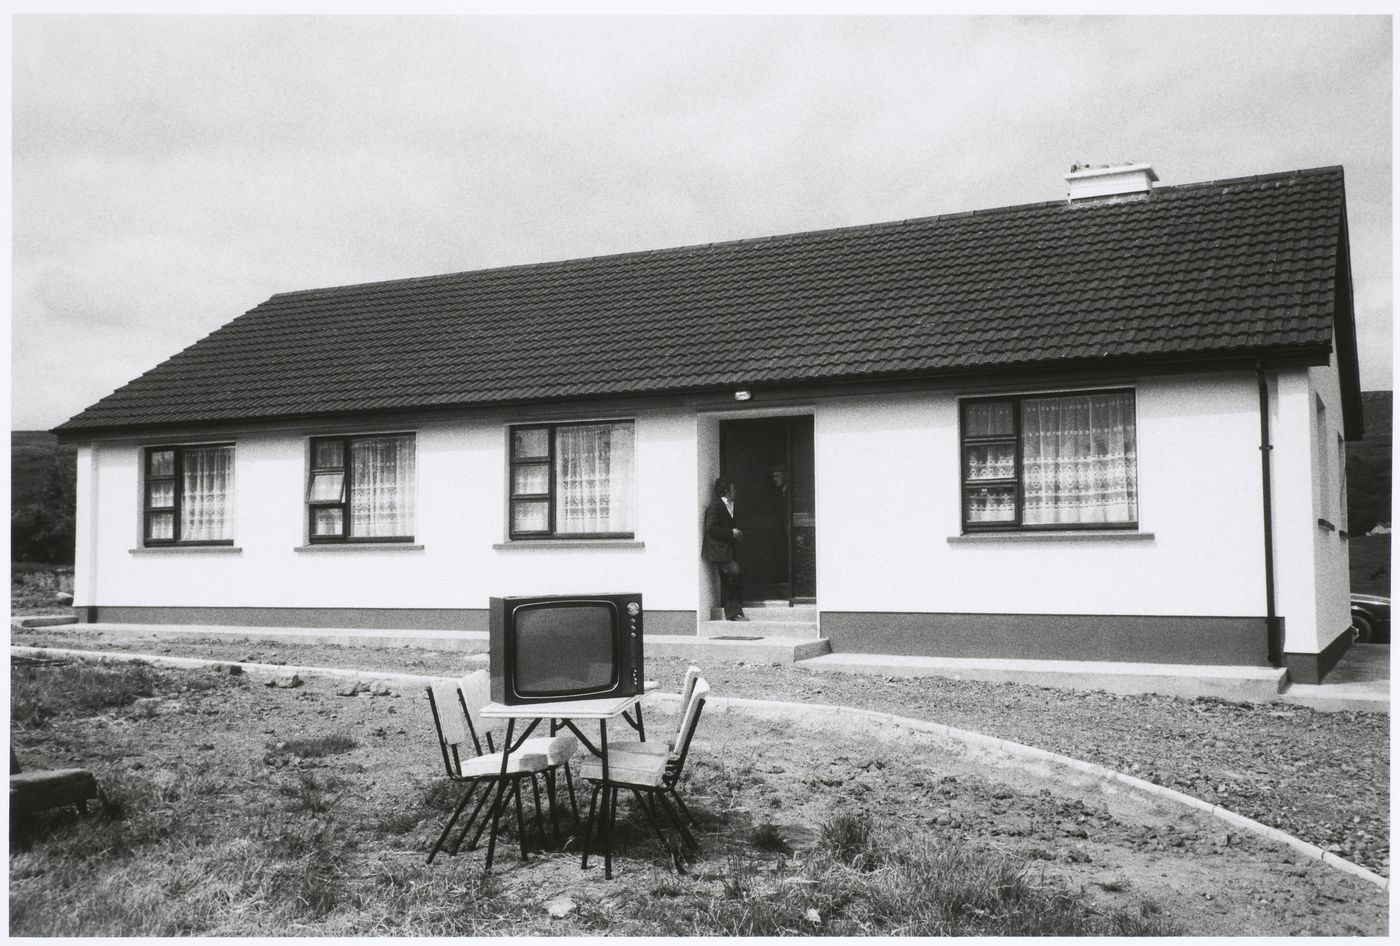 Bungalow and TV set on chairs in front, Keadue, County Roscommon, Ireland